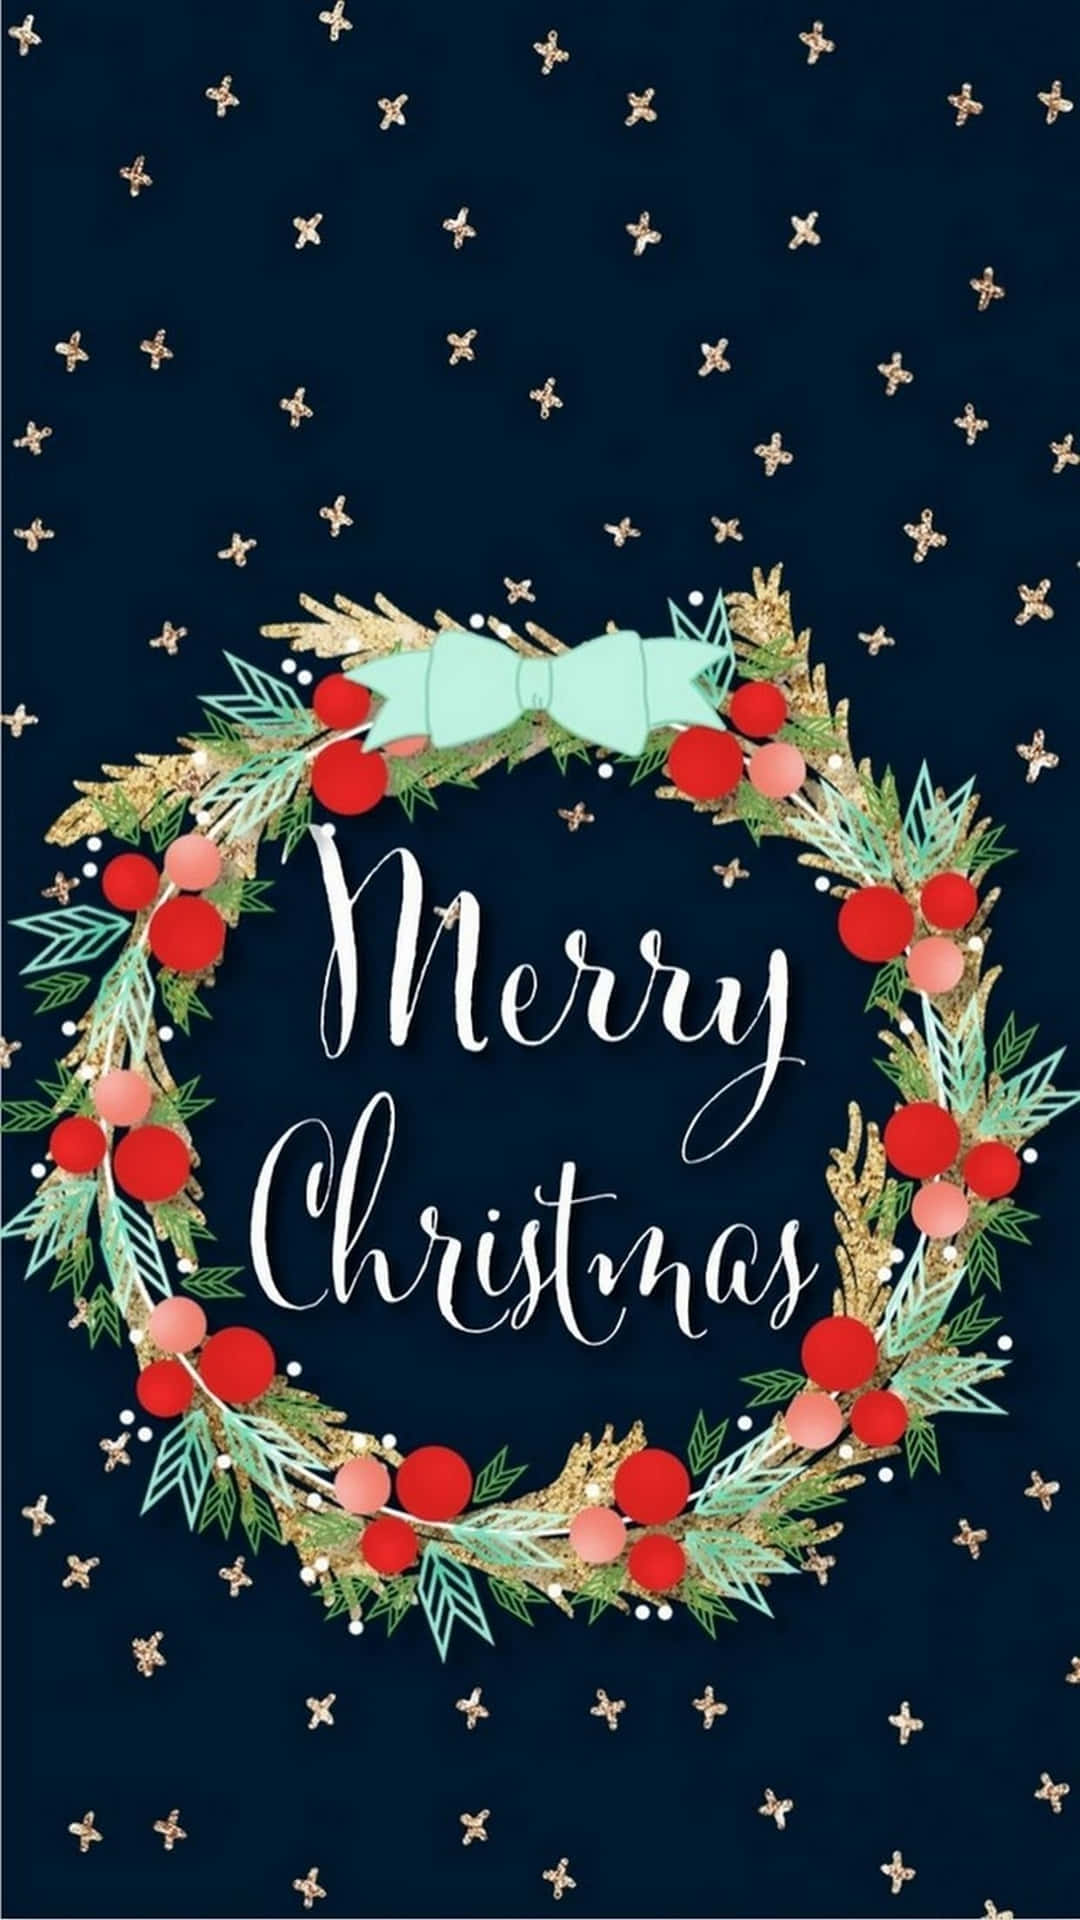 Merry Christmas Card With A Wreath And Stars Wallpaper